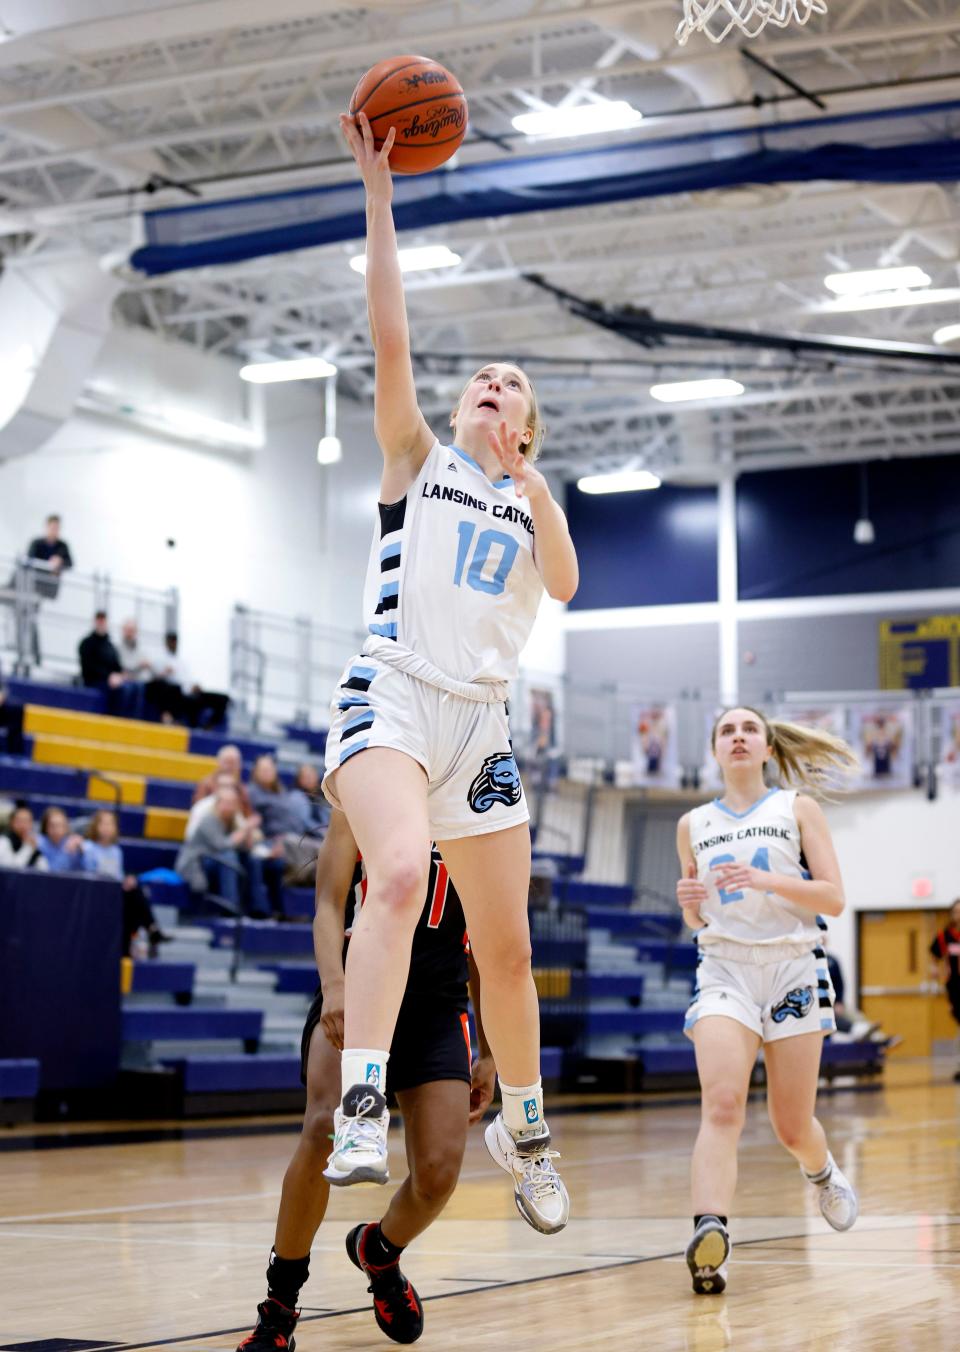 Lansing Catholic's Anna Richards goes up for a fast-break layup against Redford Westfield Prep, Tuesday, March 14, 2023, at Chelsea High School. Lansing Catholic won 78-69.